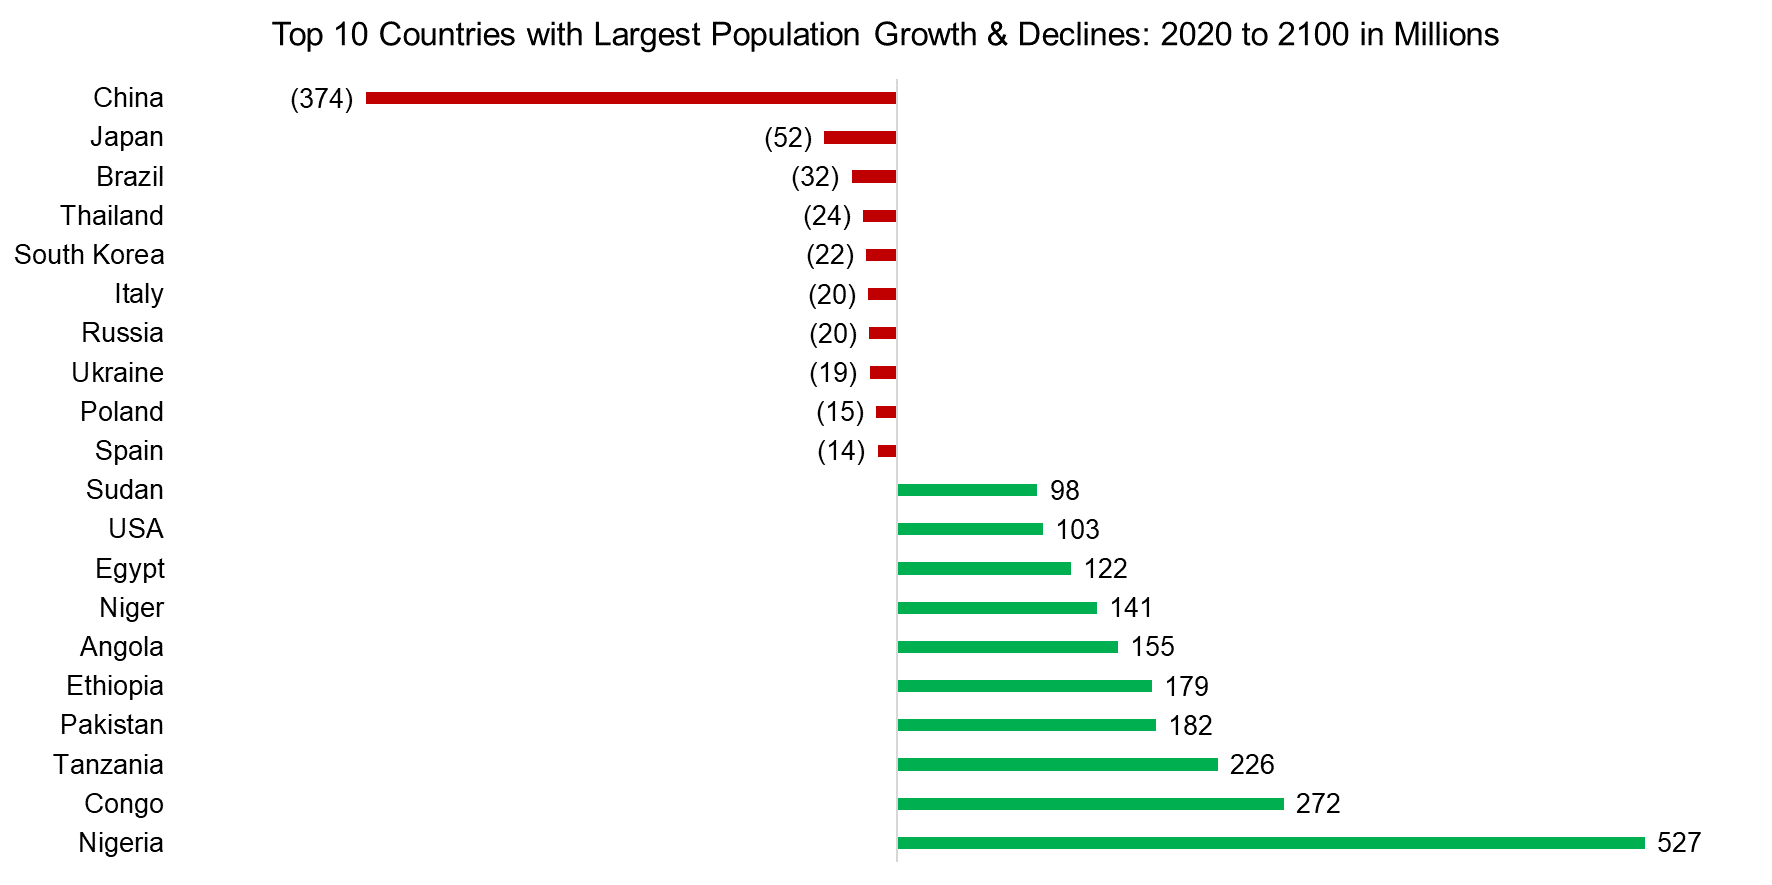 Top 10 Countries with Largest Population Growth & Declines 2020 to 2100 in Millions